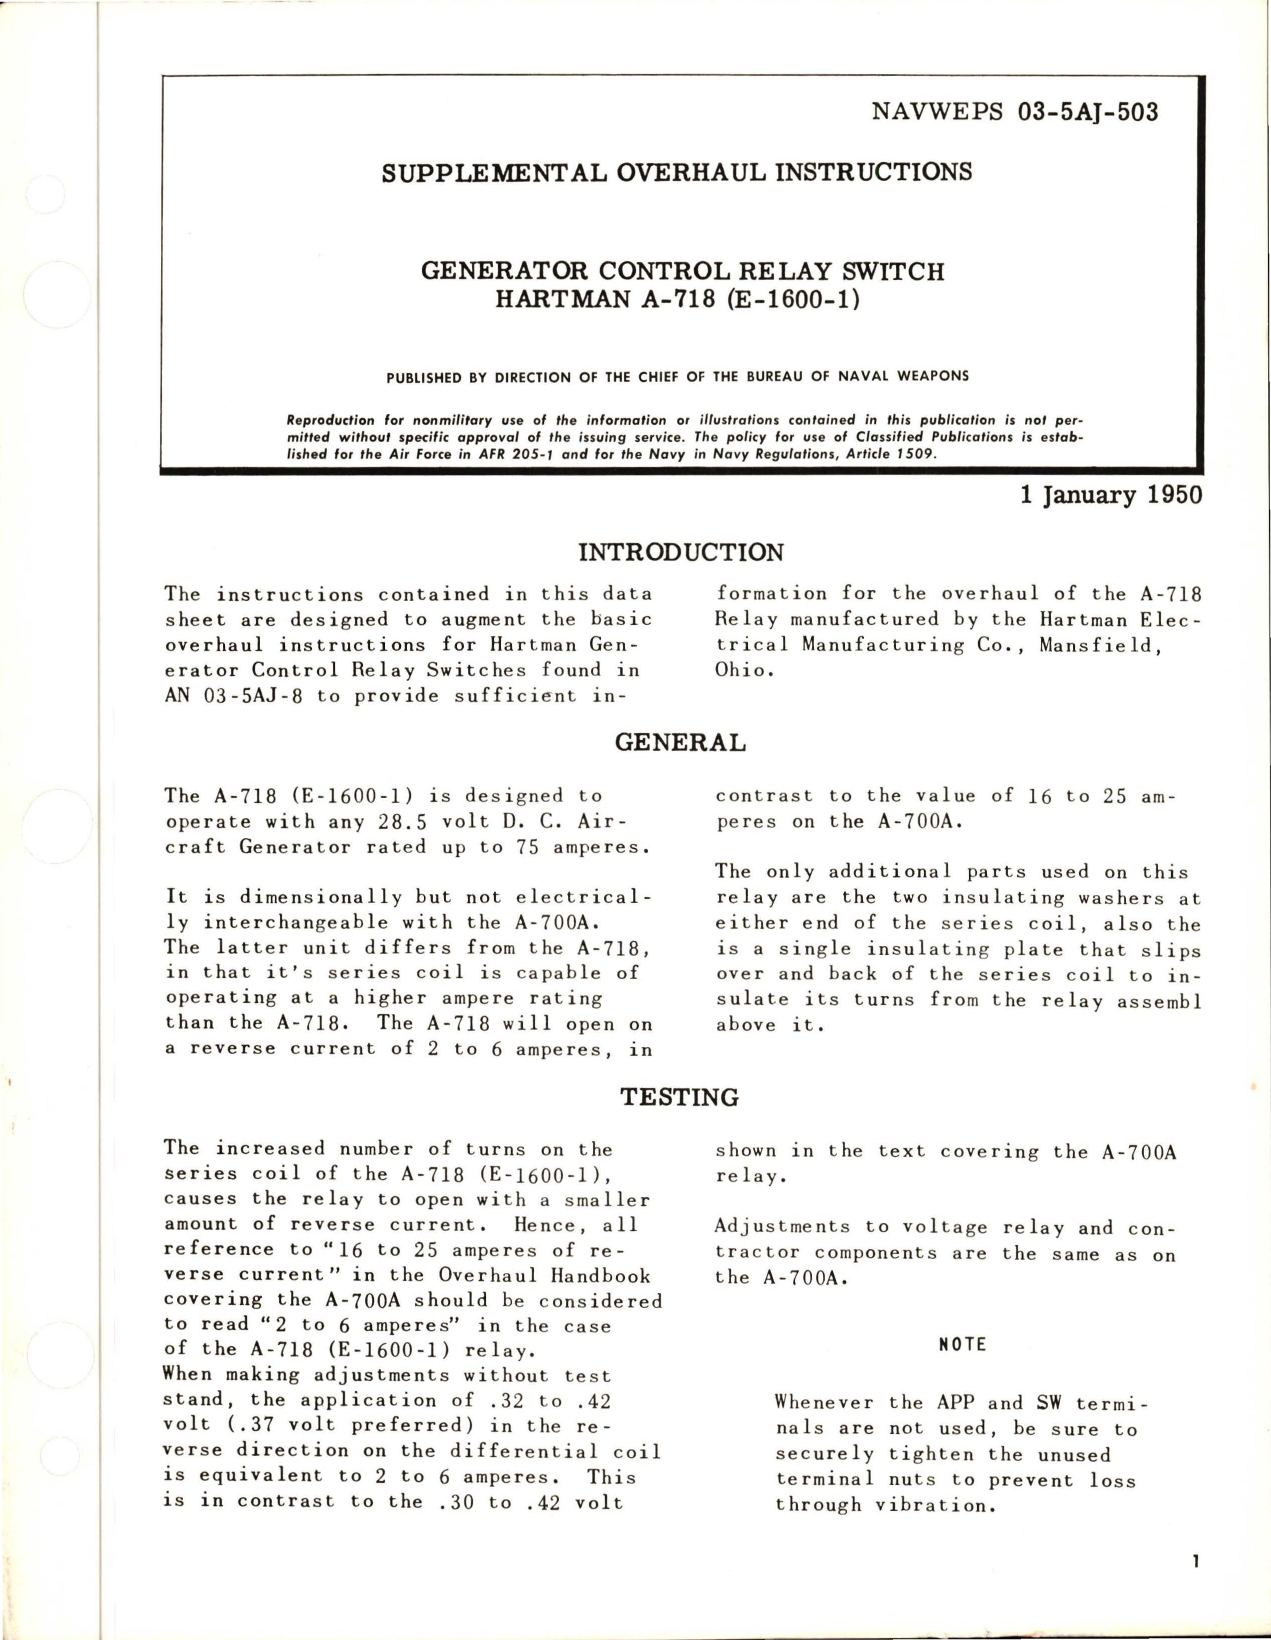 Sample page 1 from AirCorps Library document: Supplemental Overhaul Instructions for Generator Control Relay Switch - A-718, E-1600-1